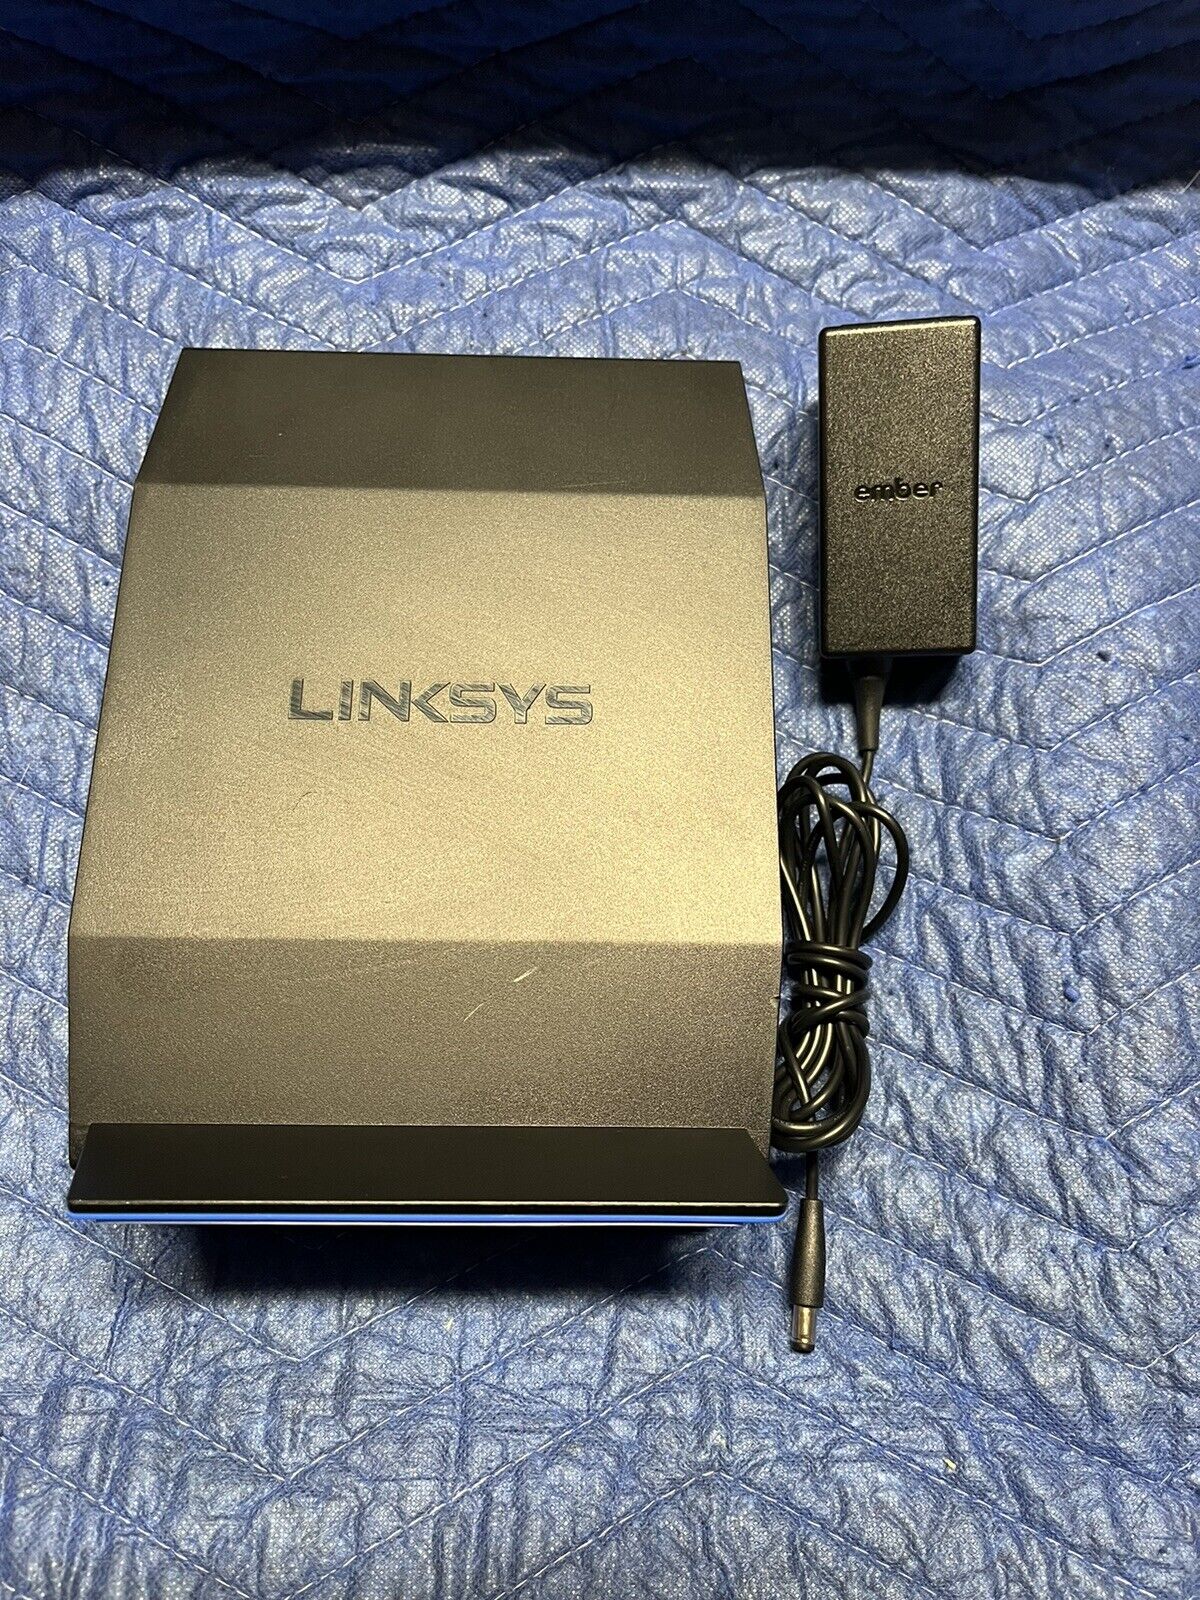 Linksys E7350 Dual-Band Wi-Fi 6 Router with Power Cord - TESTED